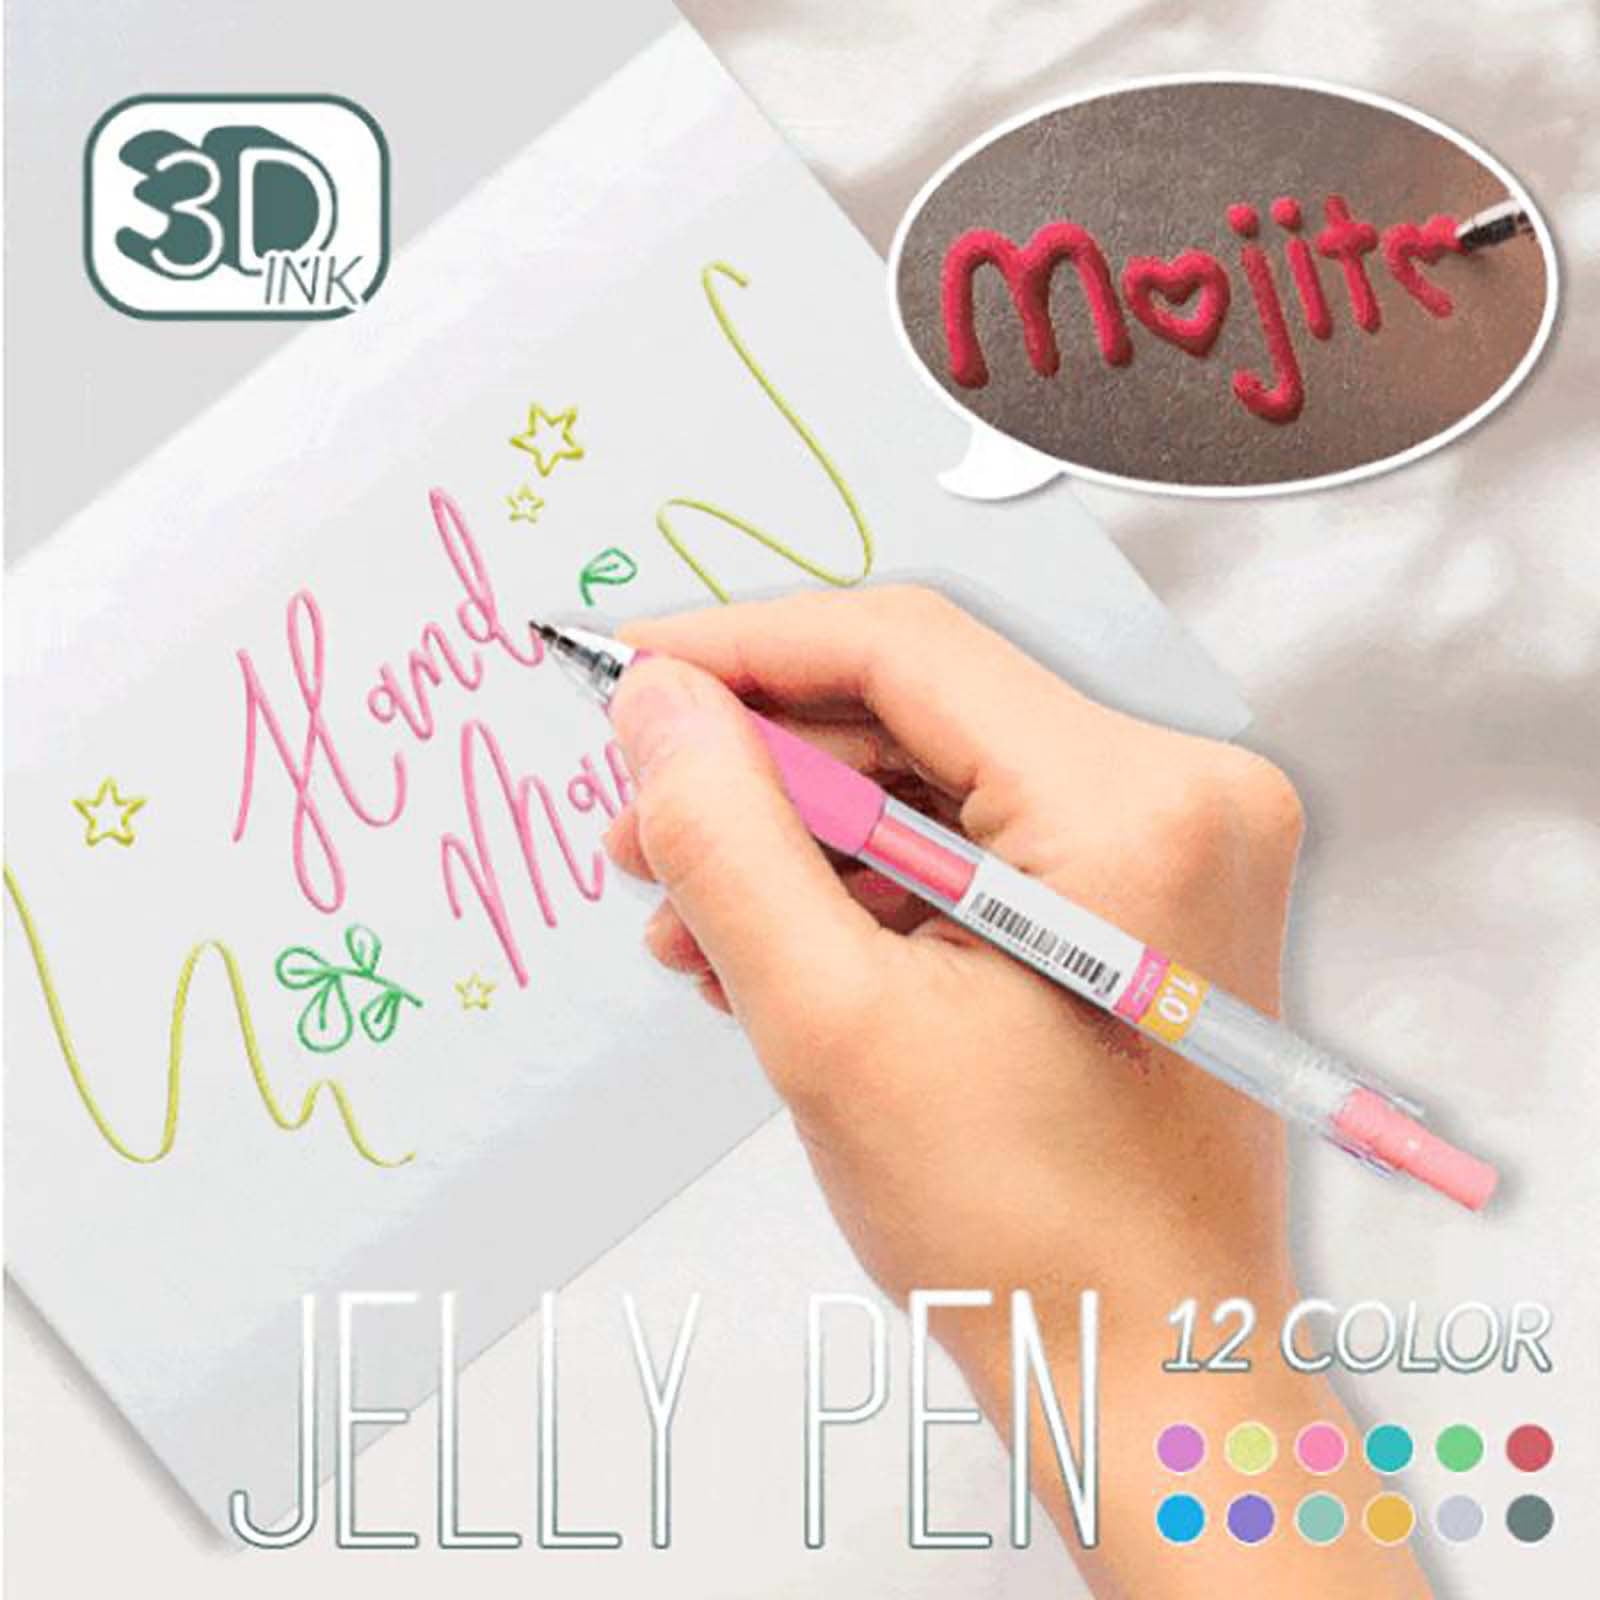 Jinli Stationery Planner 3D Jelly Pen Jelly Highlighter Markers Markers  Accent Markers Drawing Pens